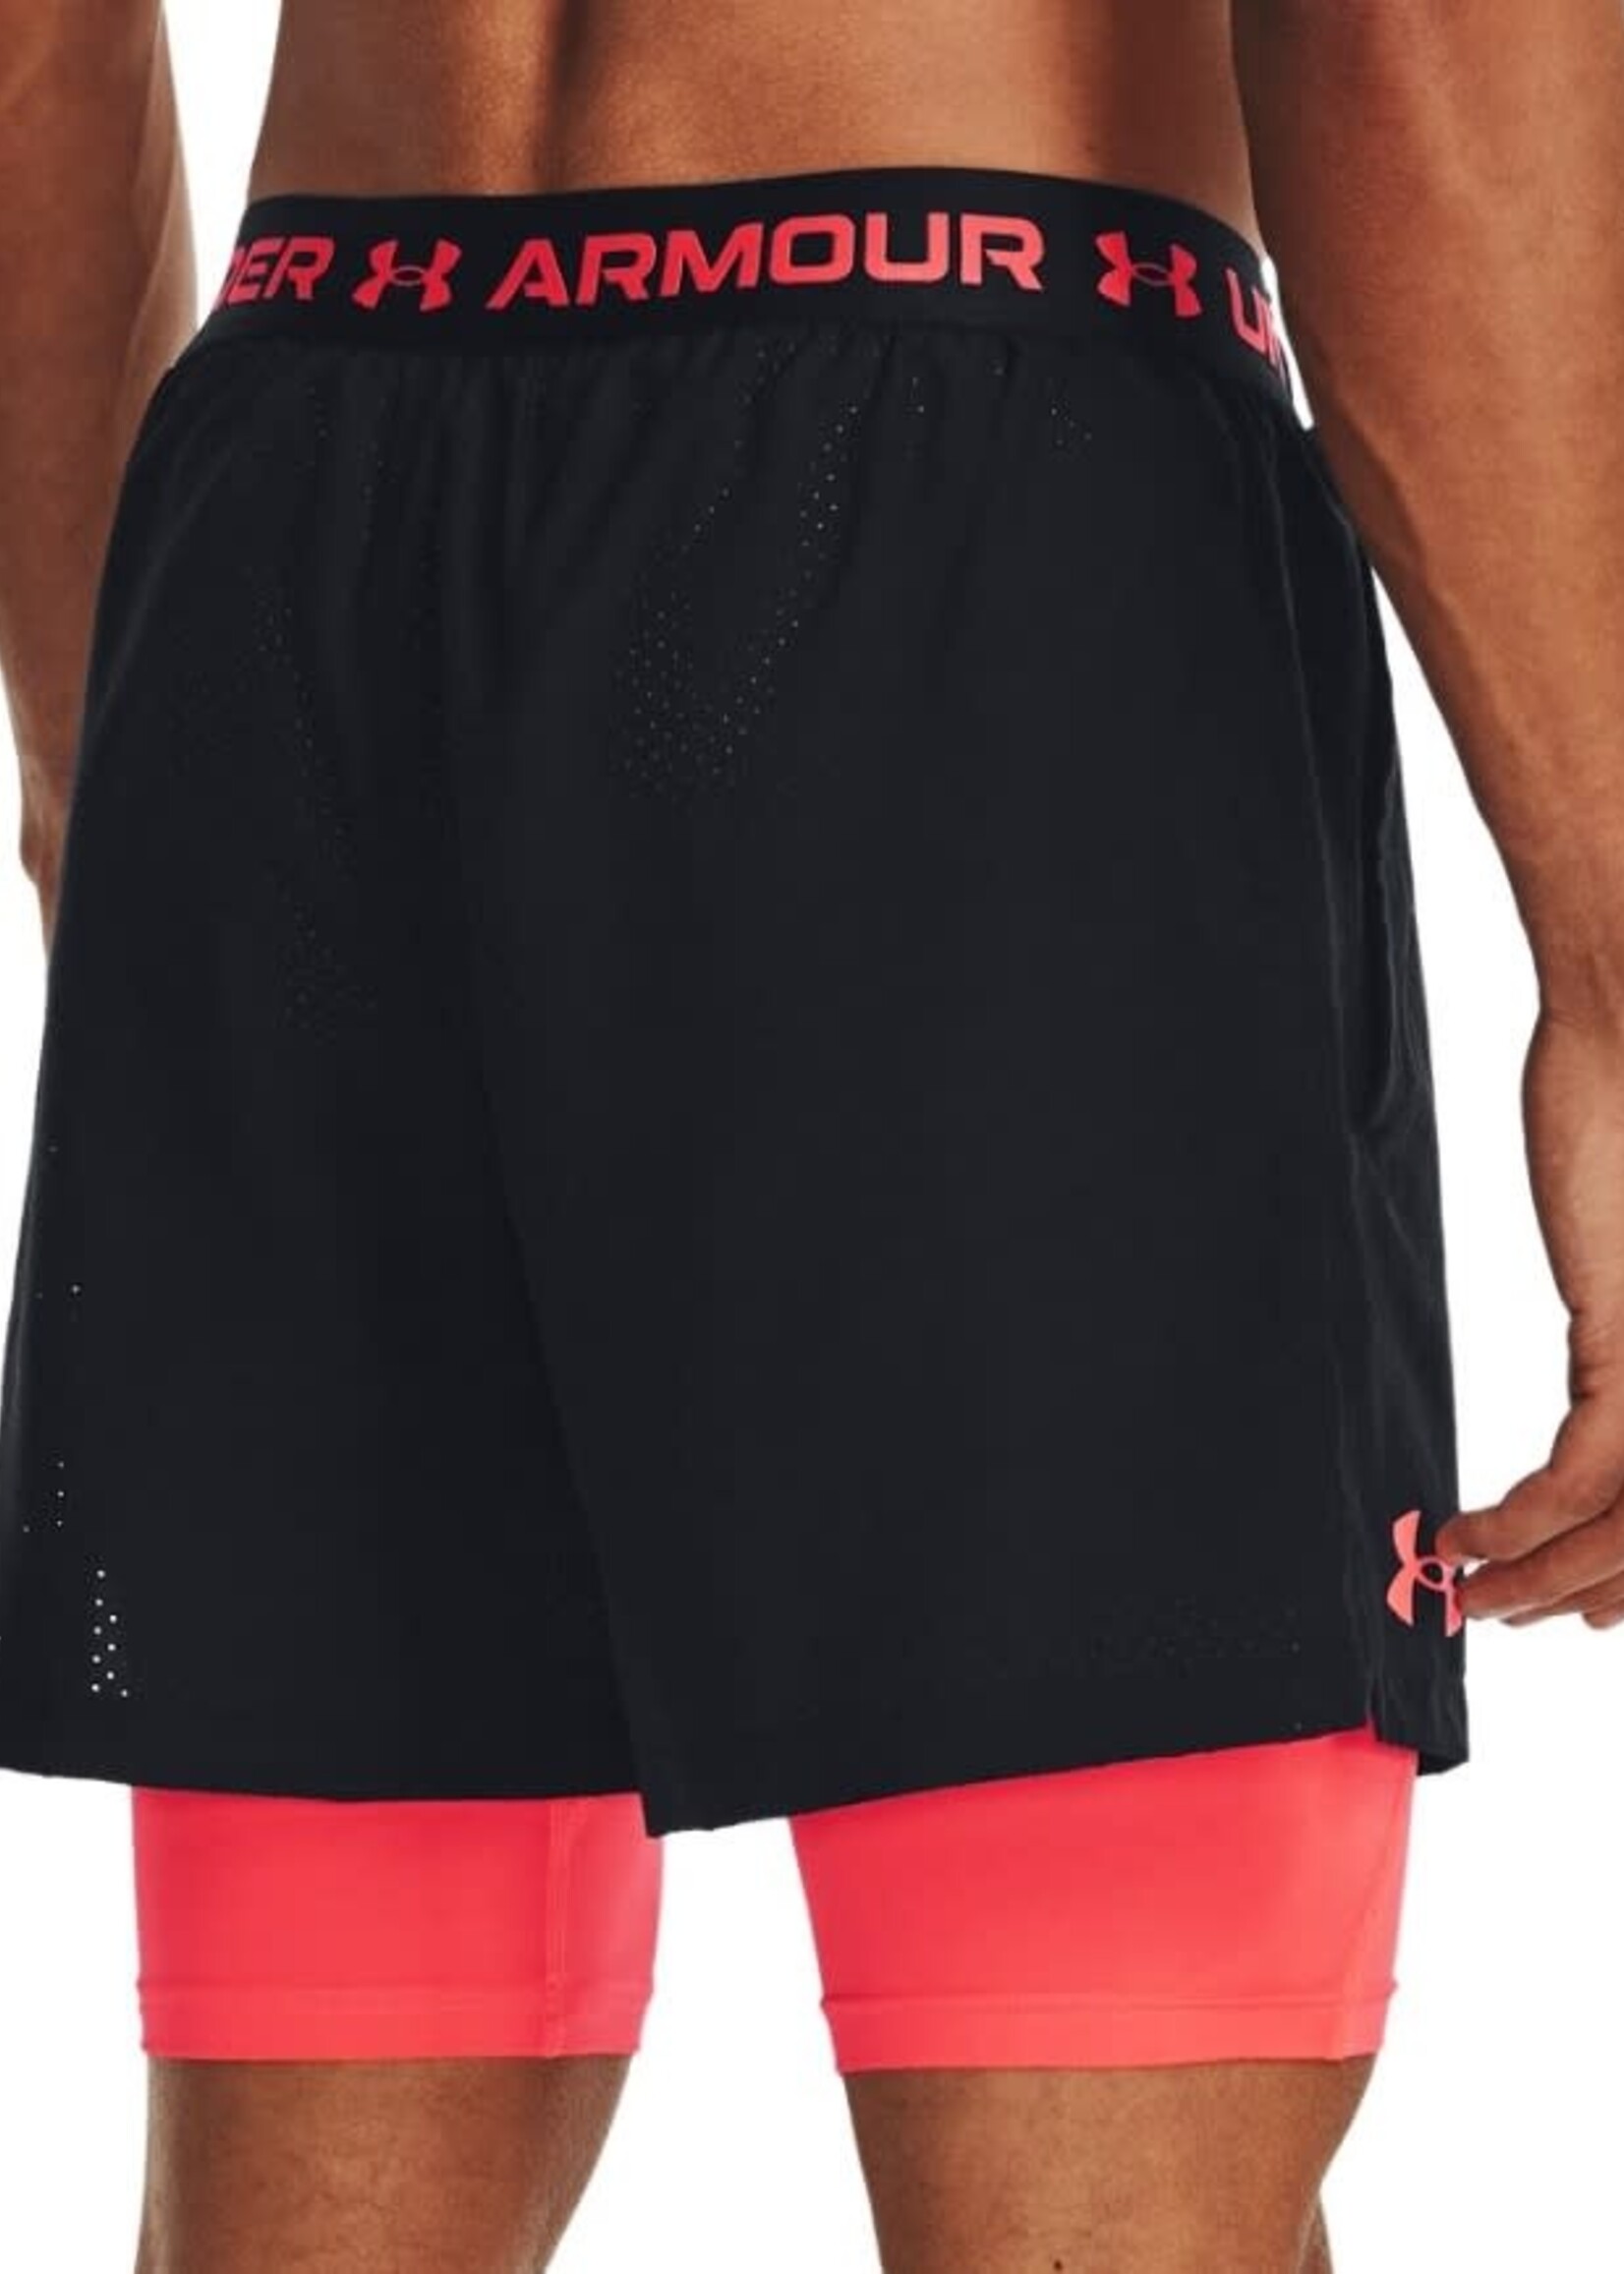 Under Armour Ua Vanish Woven 2In1 Vent Shorts-Blk